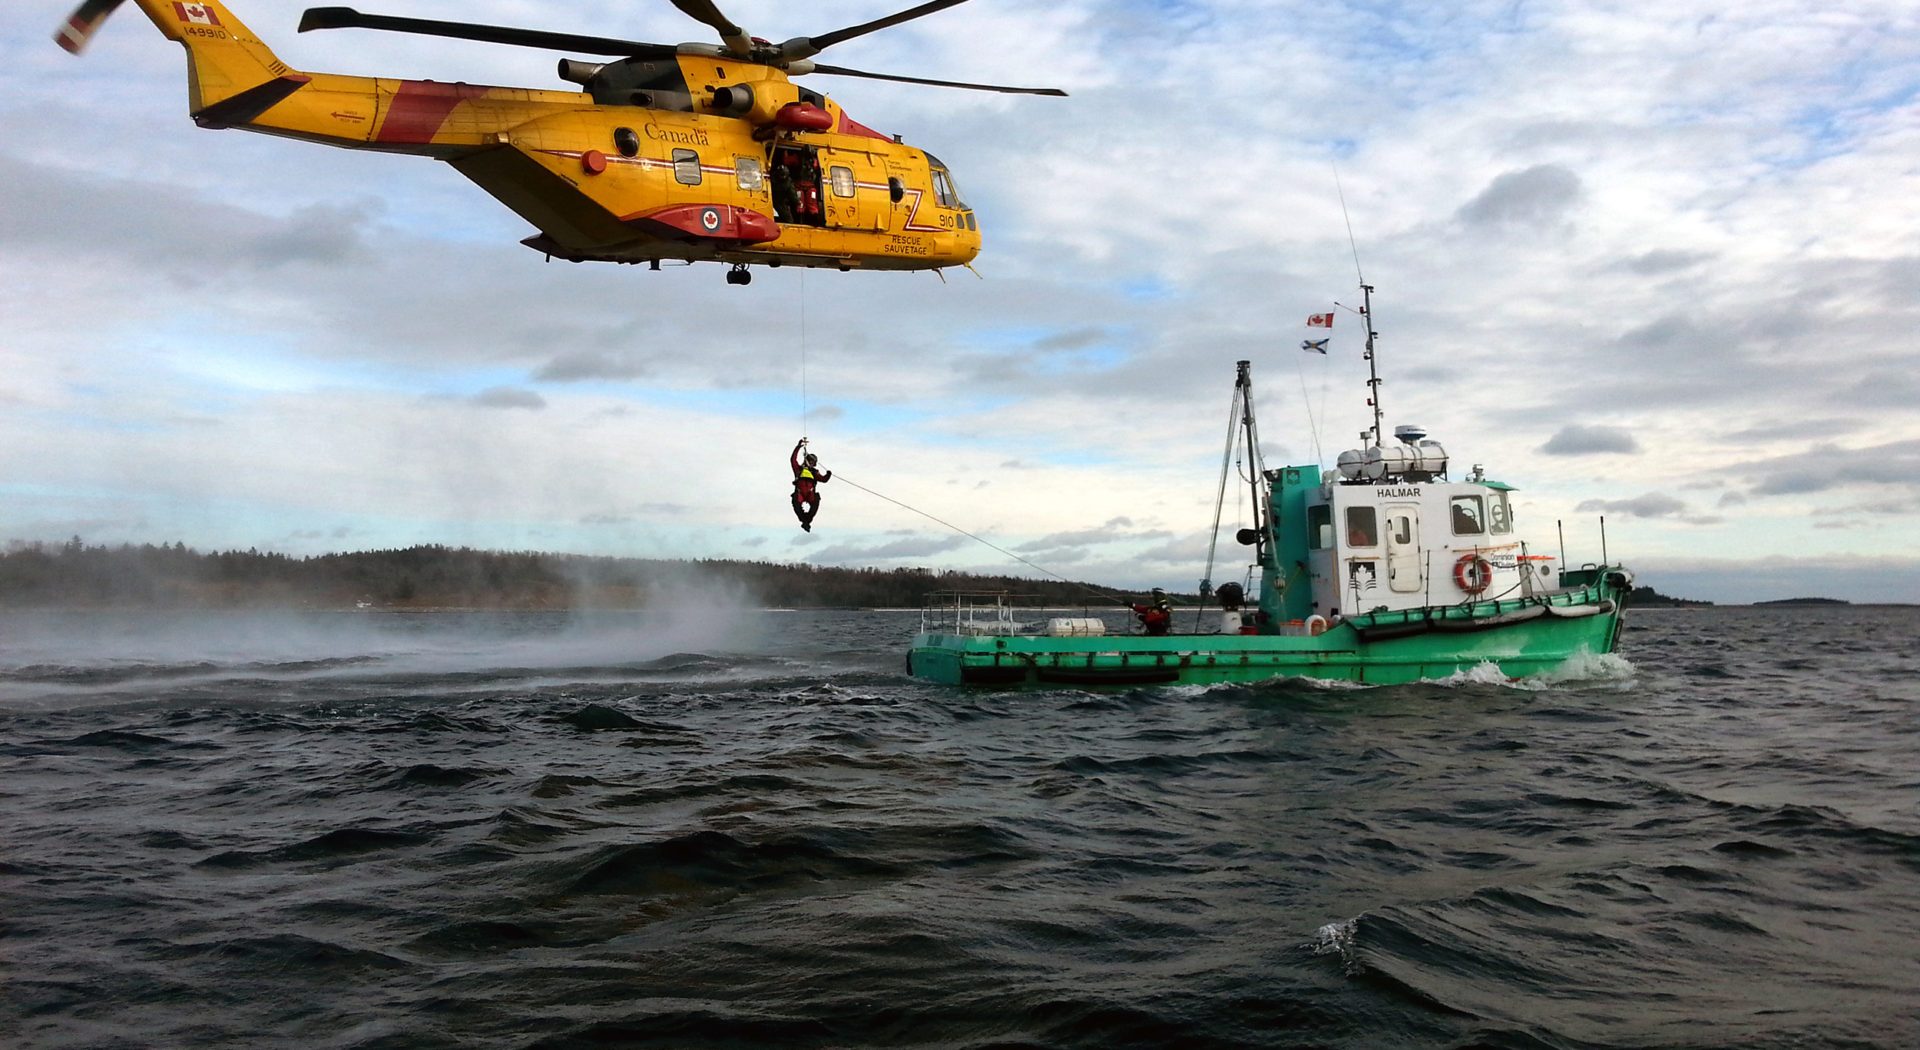 Dominion Diving - Training with Search & Rescue from 14 Wing Greenwood